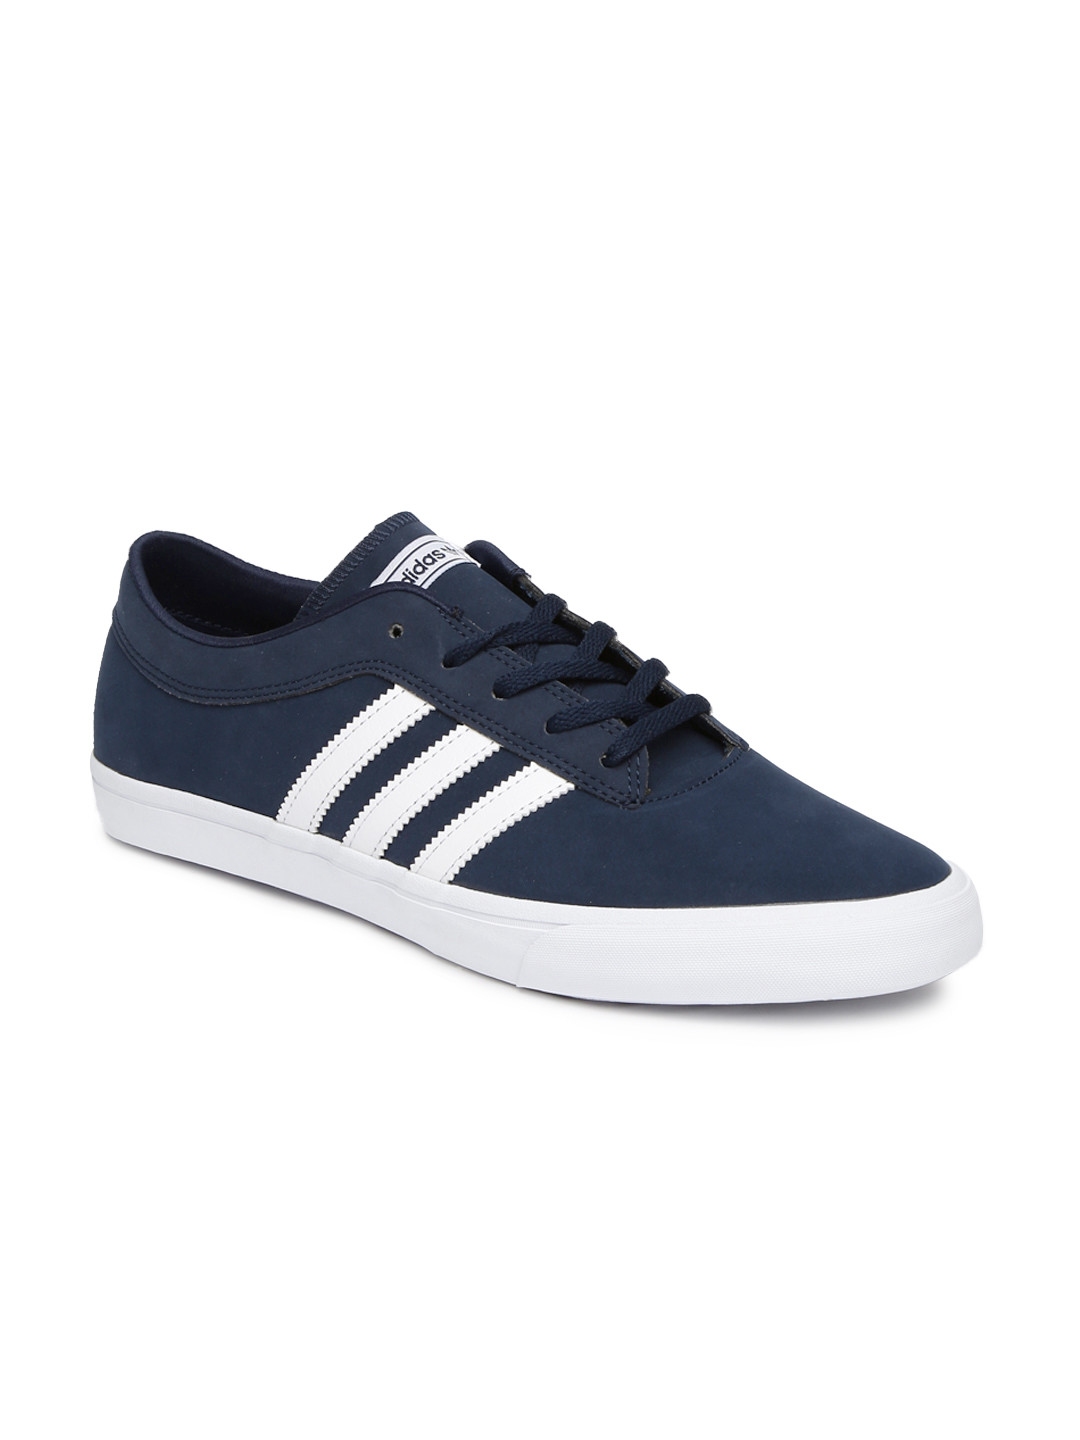 Buy ADIDAS Originals Men Navy Blue SELLWOOD Sneakers - Casual Shoes for ...